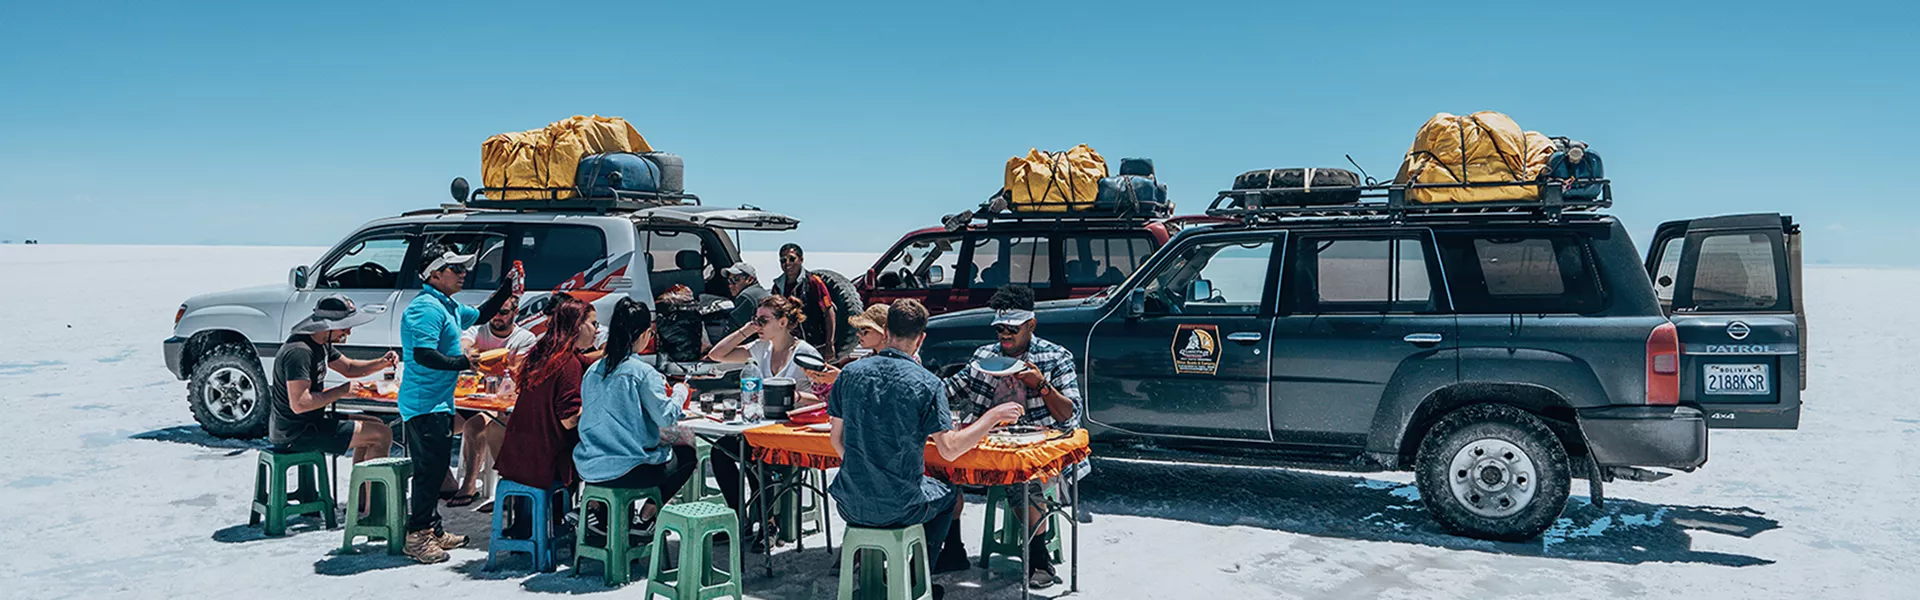 People dining at the off road trip